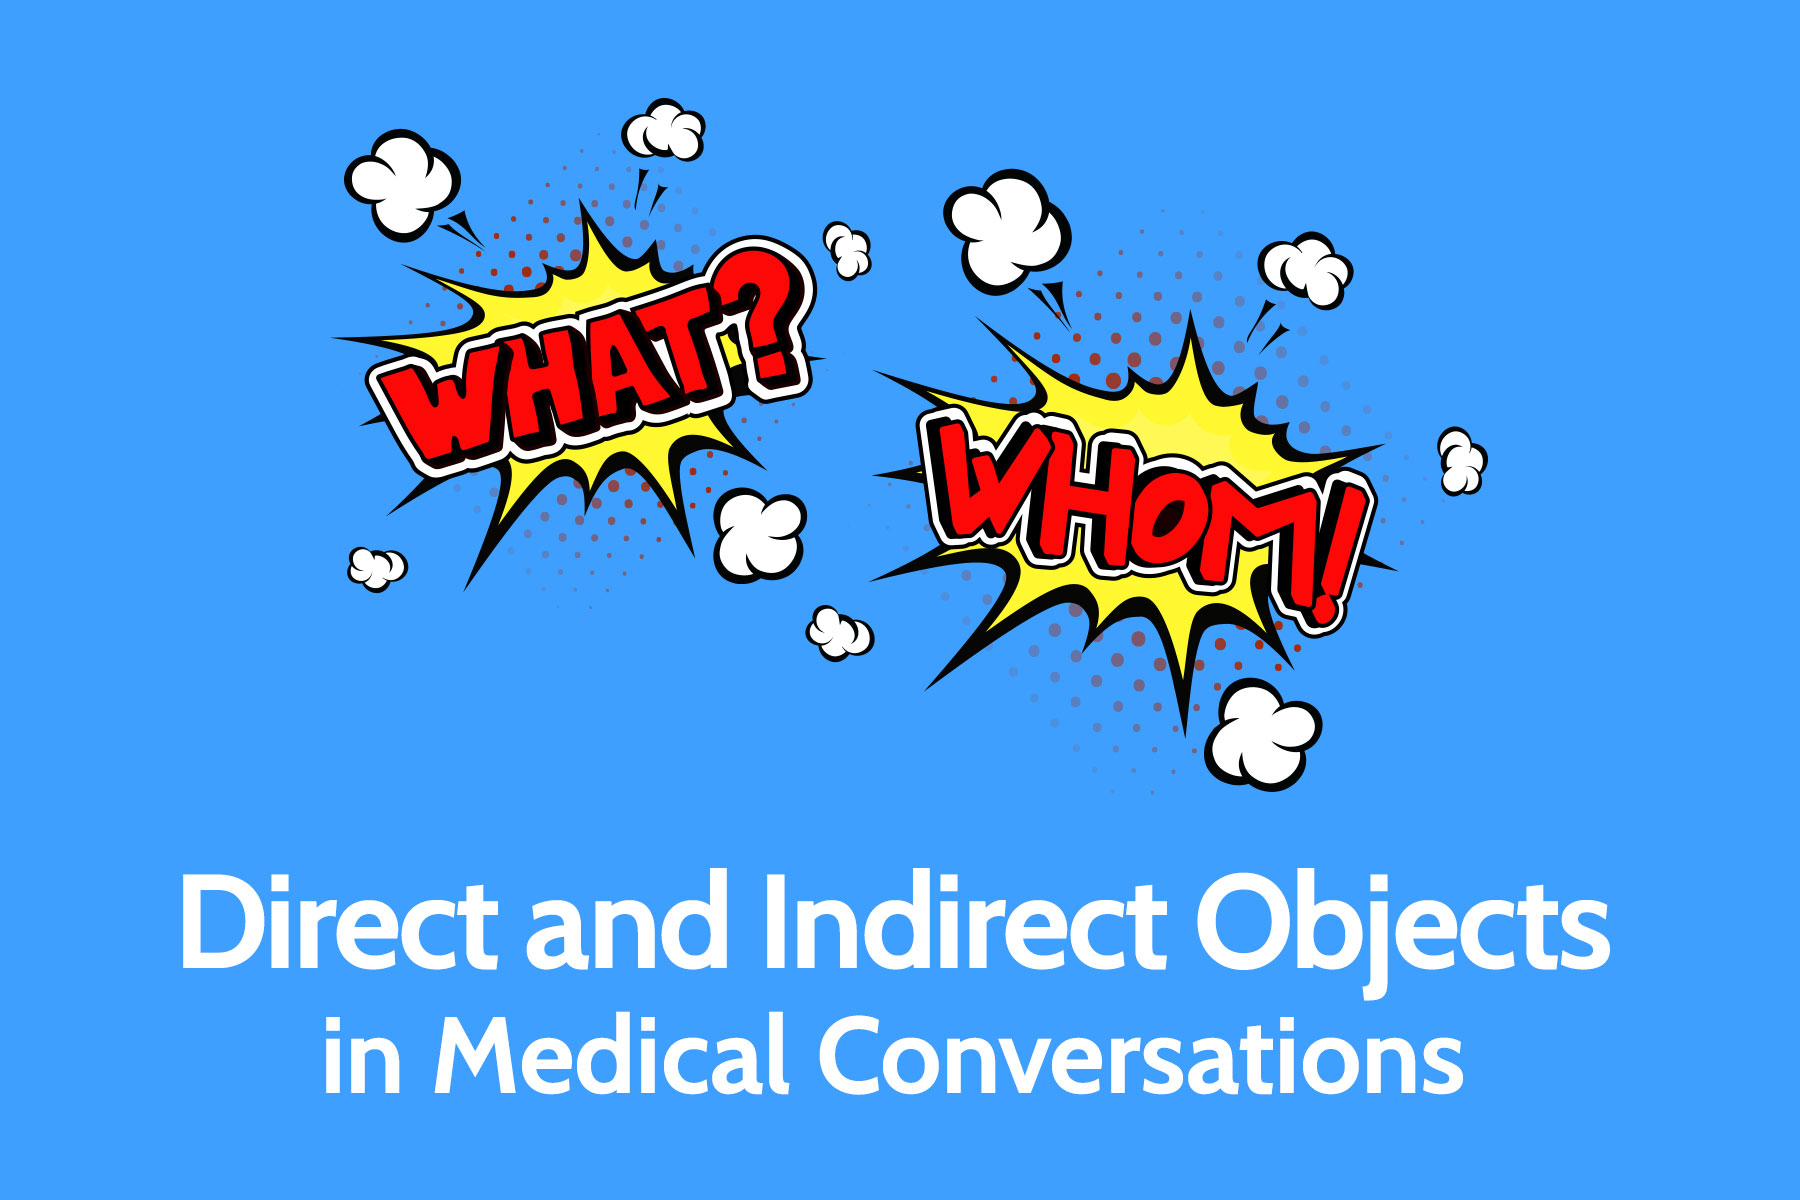 Direct and Indirect Objects in Medical Conversations